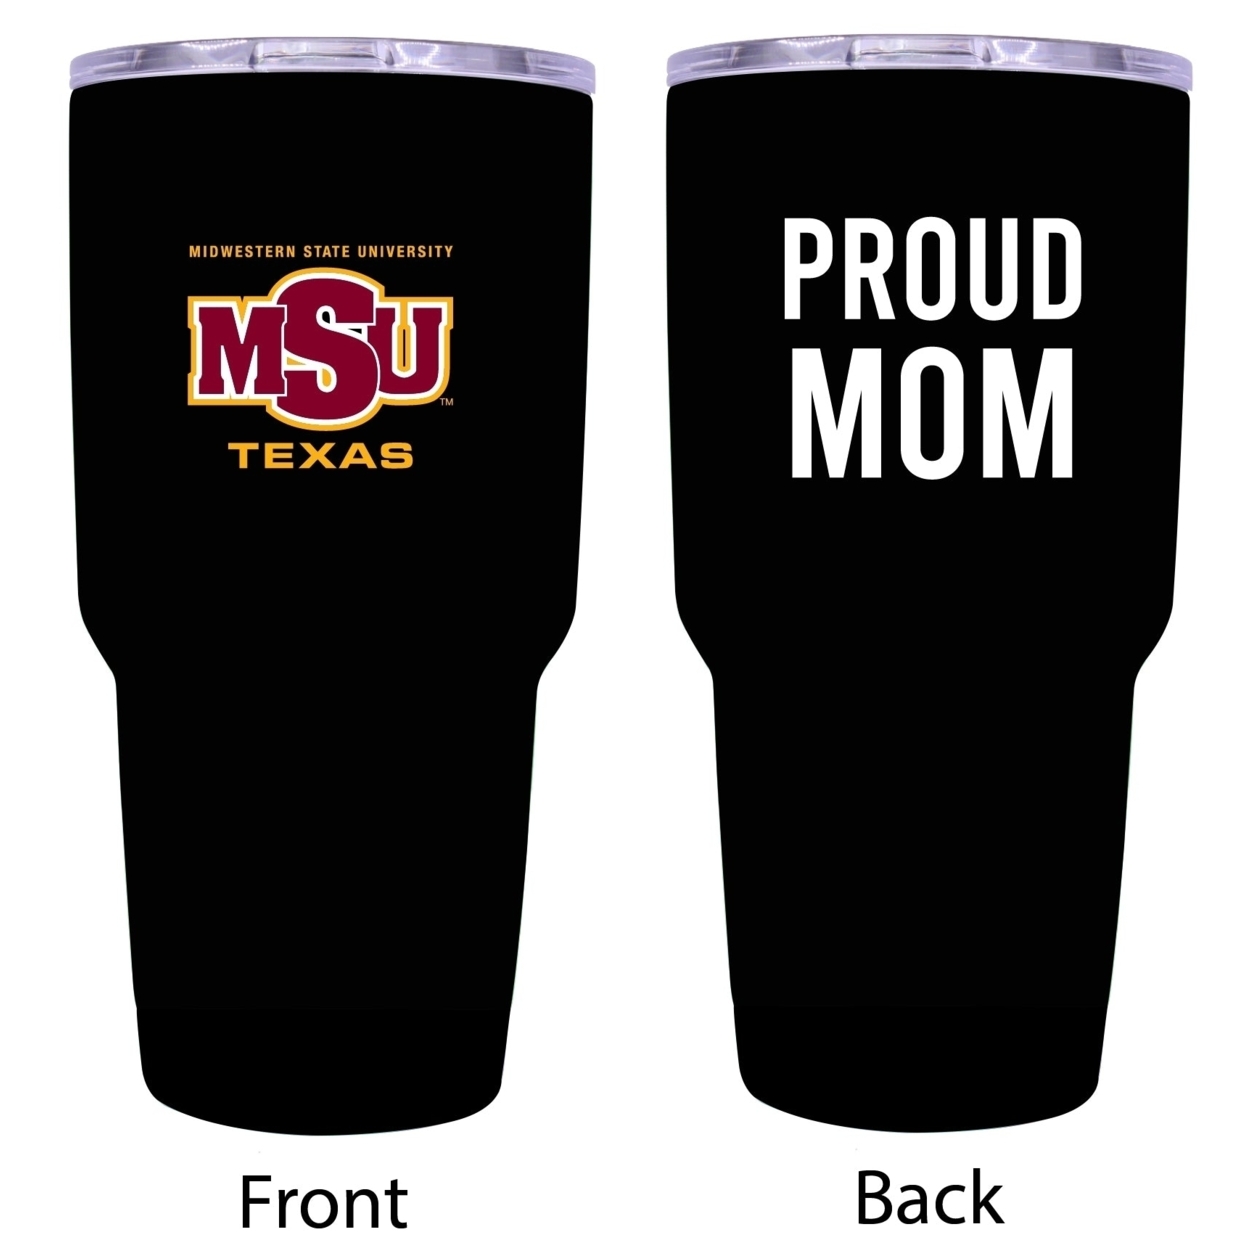 Midwestern State University Proud MOM Insulated Tumbler